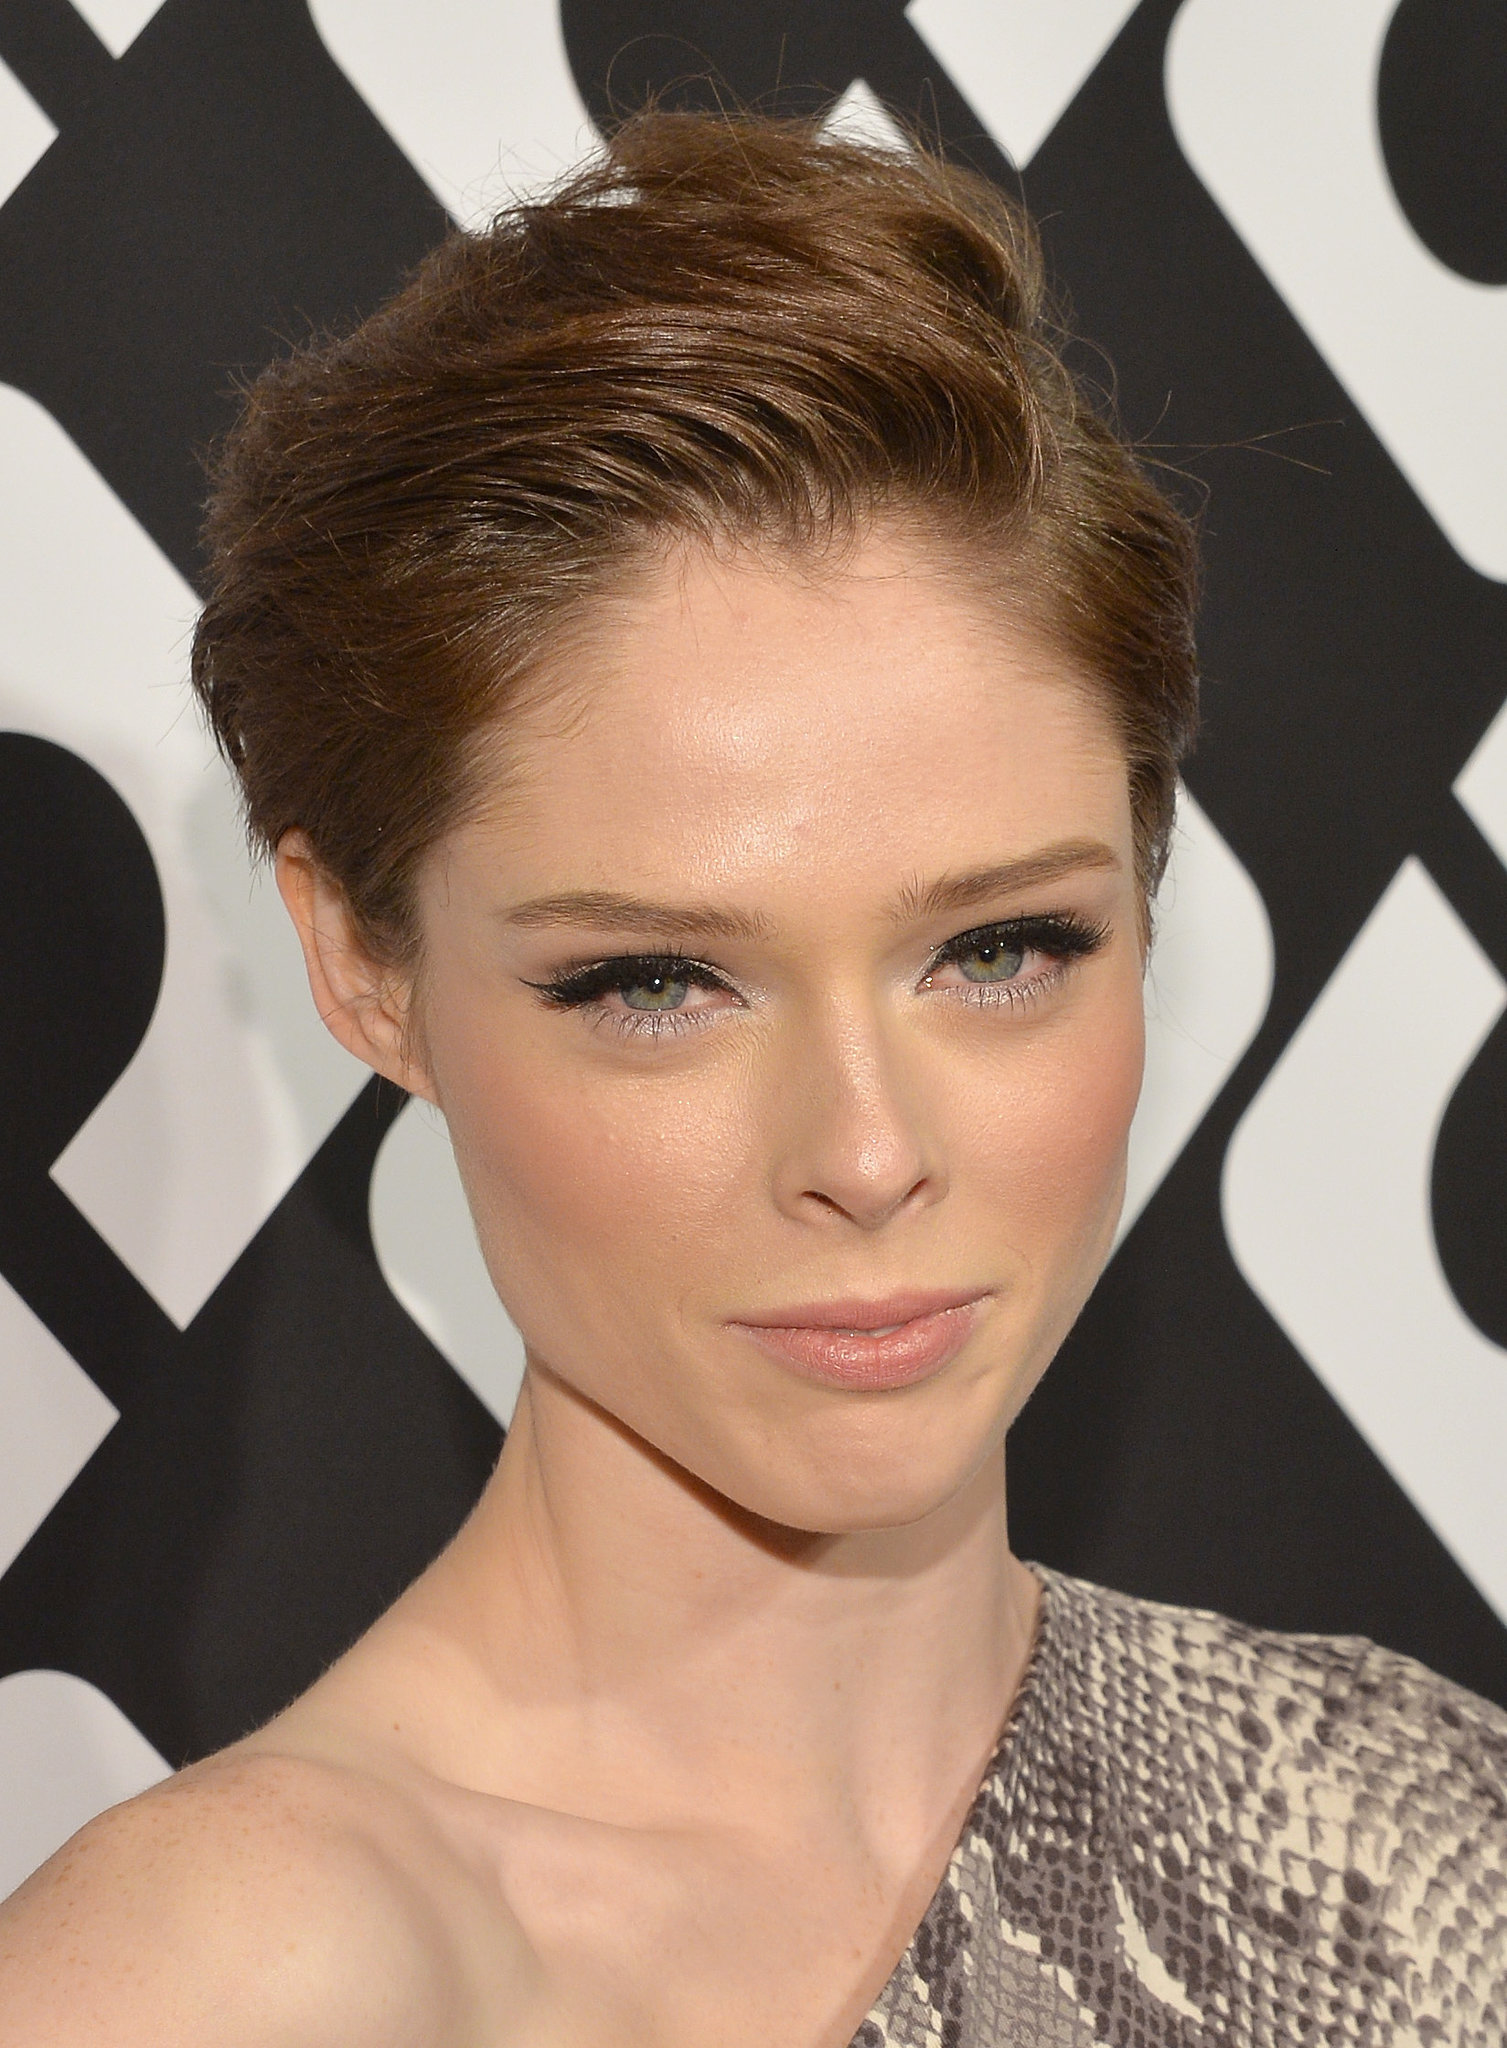 Coco Rocha proved that a pixie cut is incredibly versatile with this ...